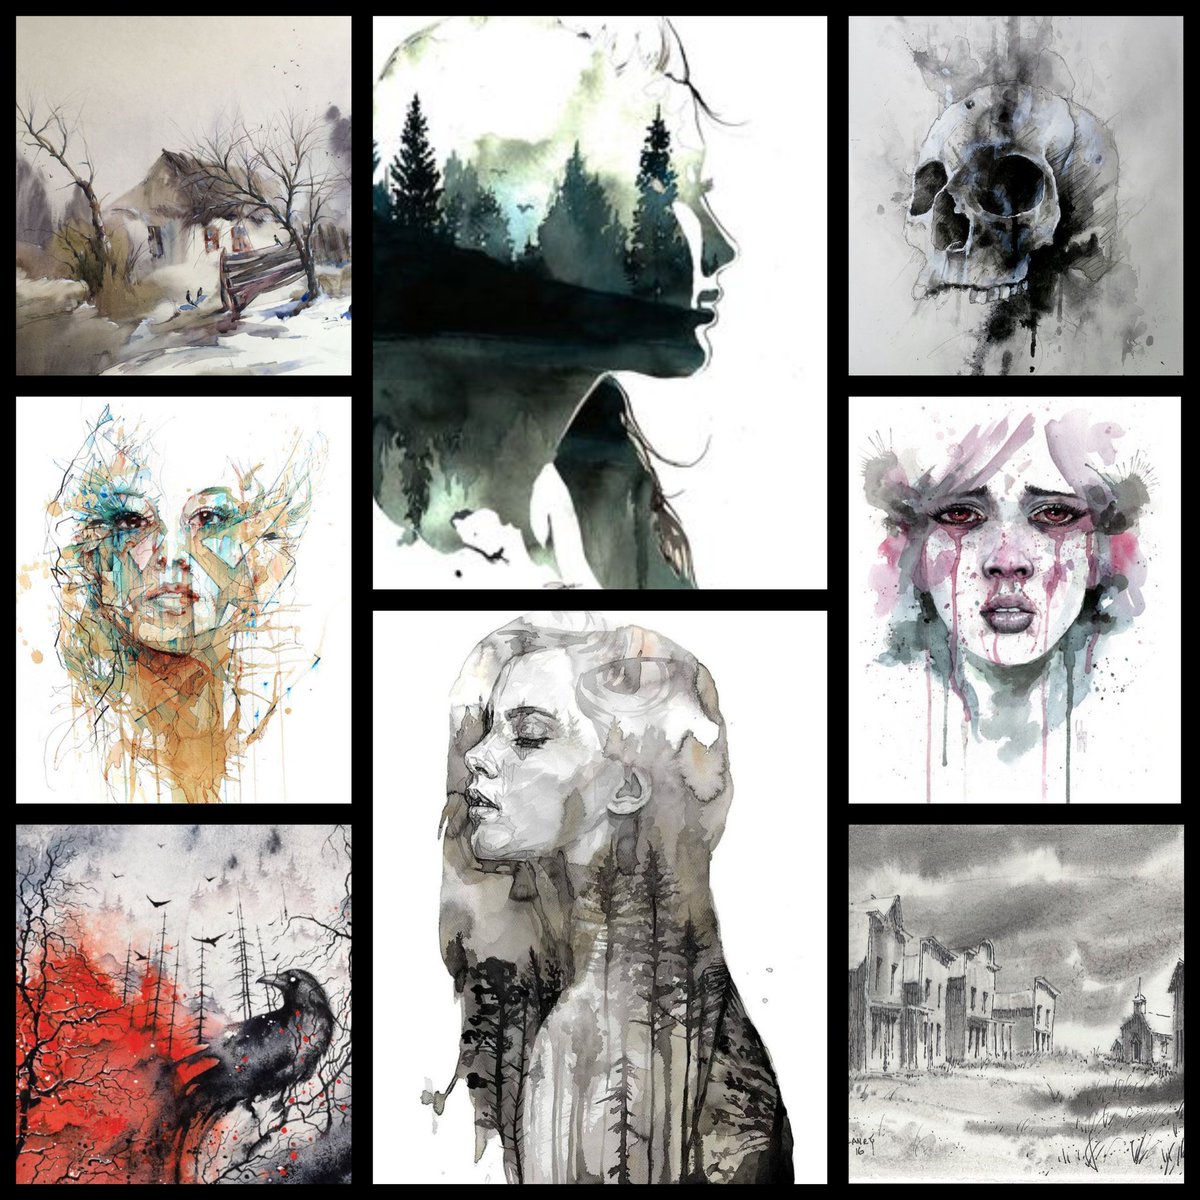 #FantasyIndiesMaytober 30

I've been collecting samples of watercolor dark aesthetic to make my book cover format. These works below are not of mine. Just a modboard for inspiration. 

Hosts;@LydiaVRussell @ChesneyInfalt